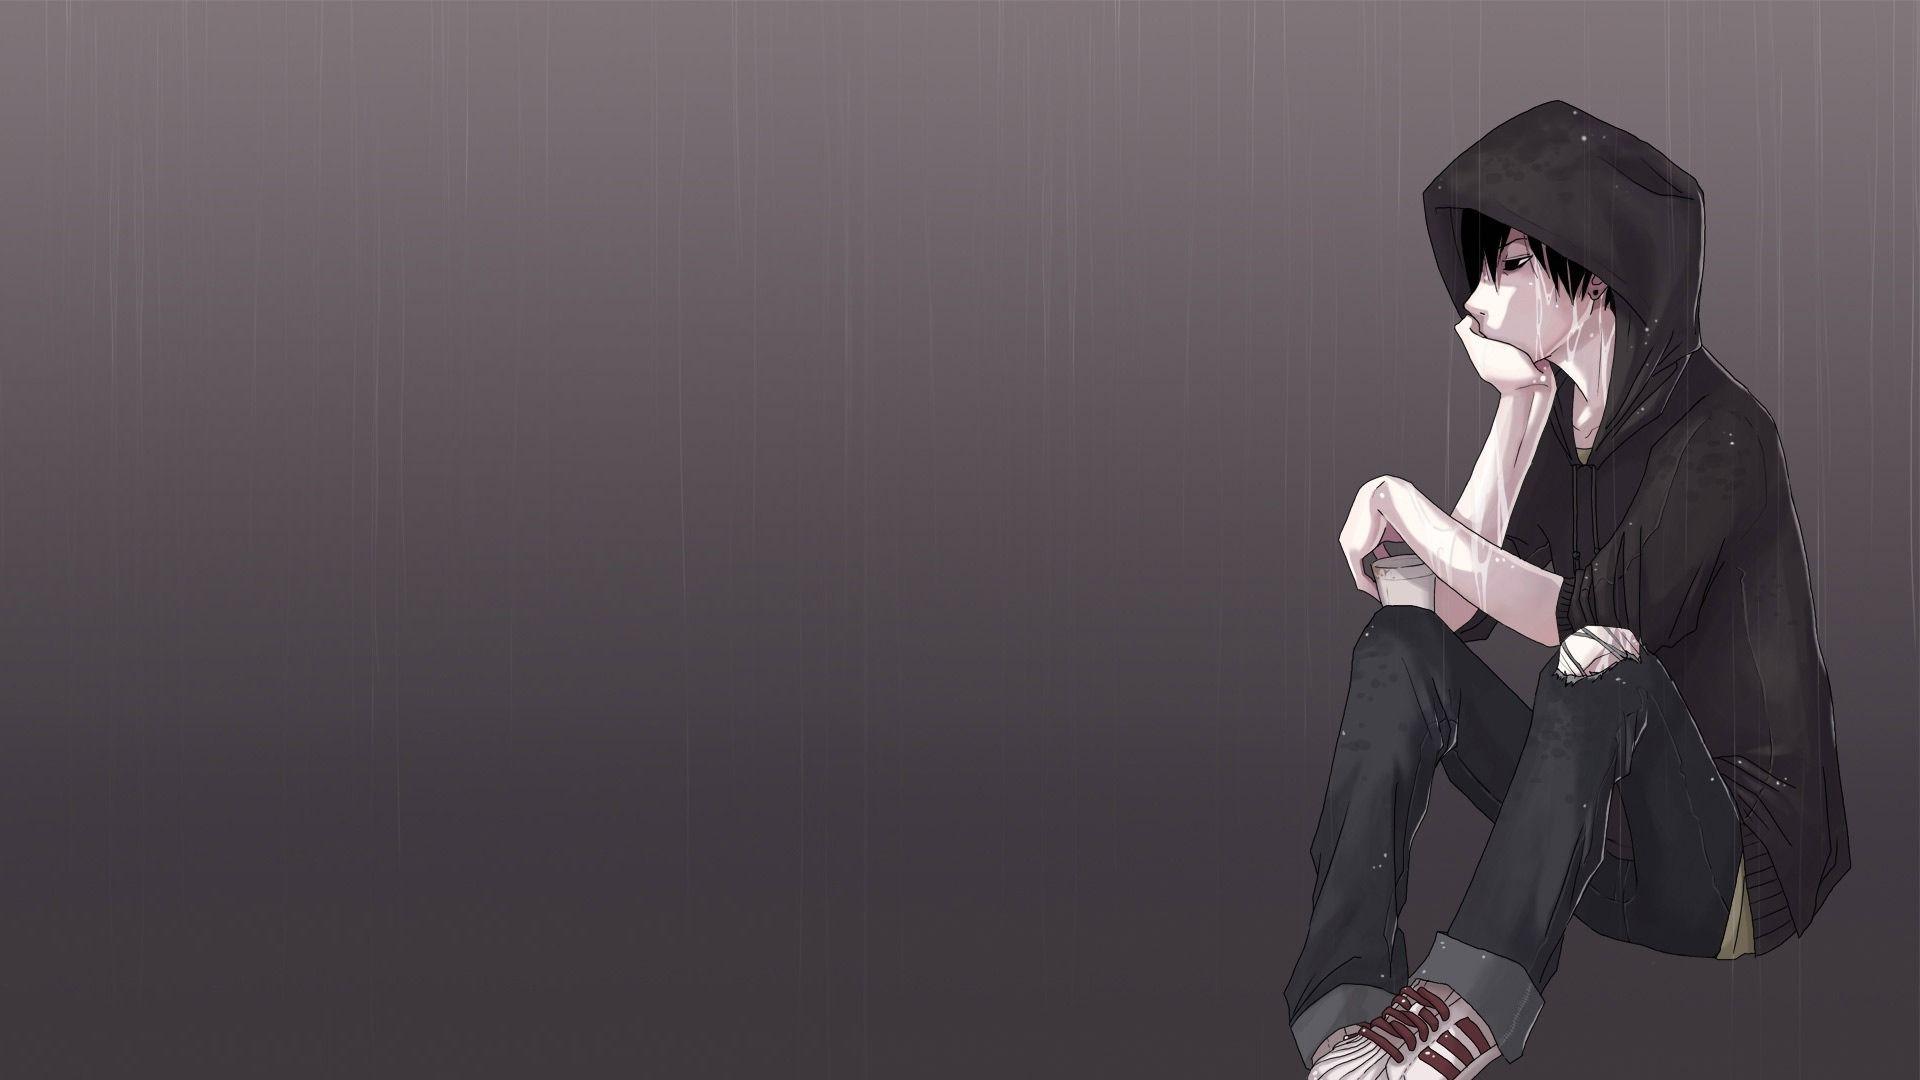 Download Anime HD Wallpaper Background Image boy anime lonely